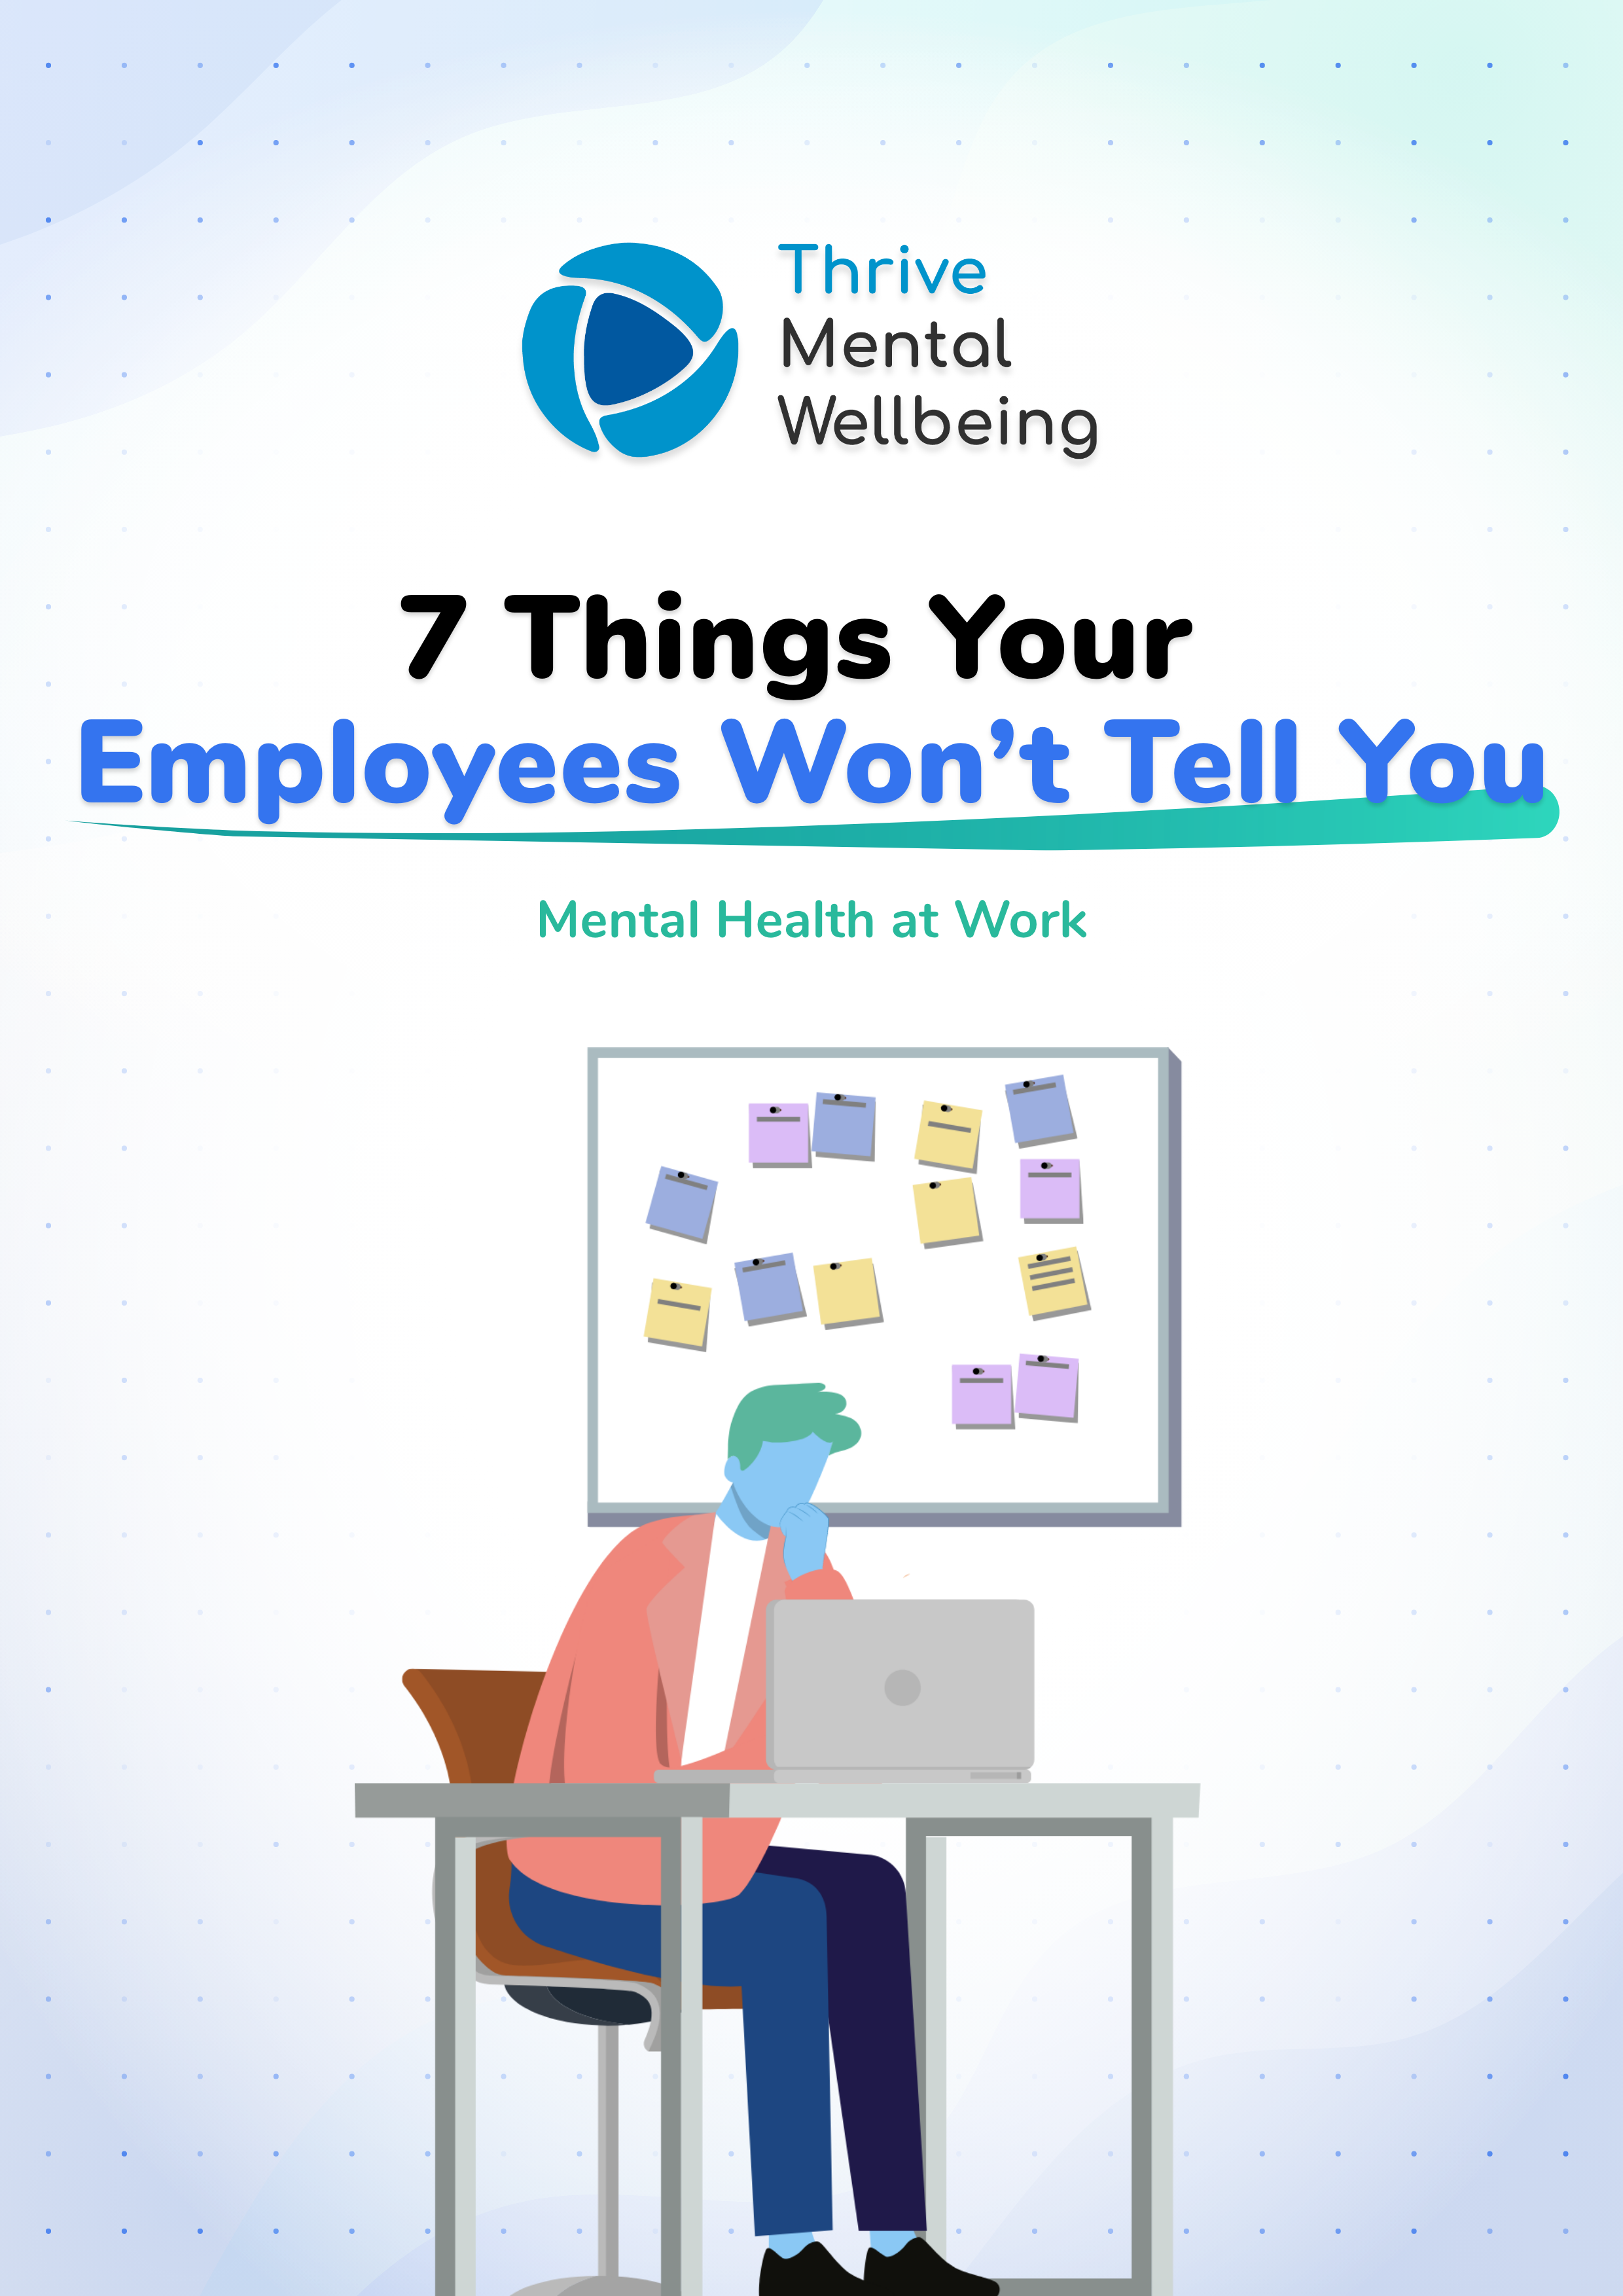 Mental Health At Work: 7 Things Your Employees Won’t Tell You